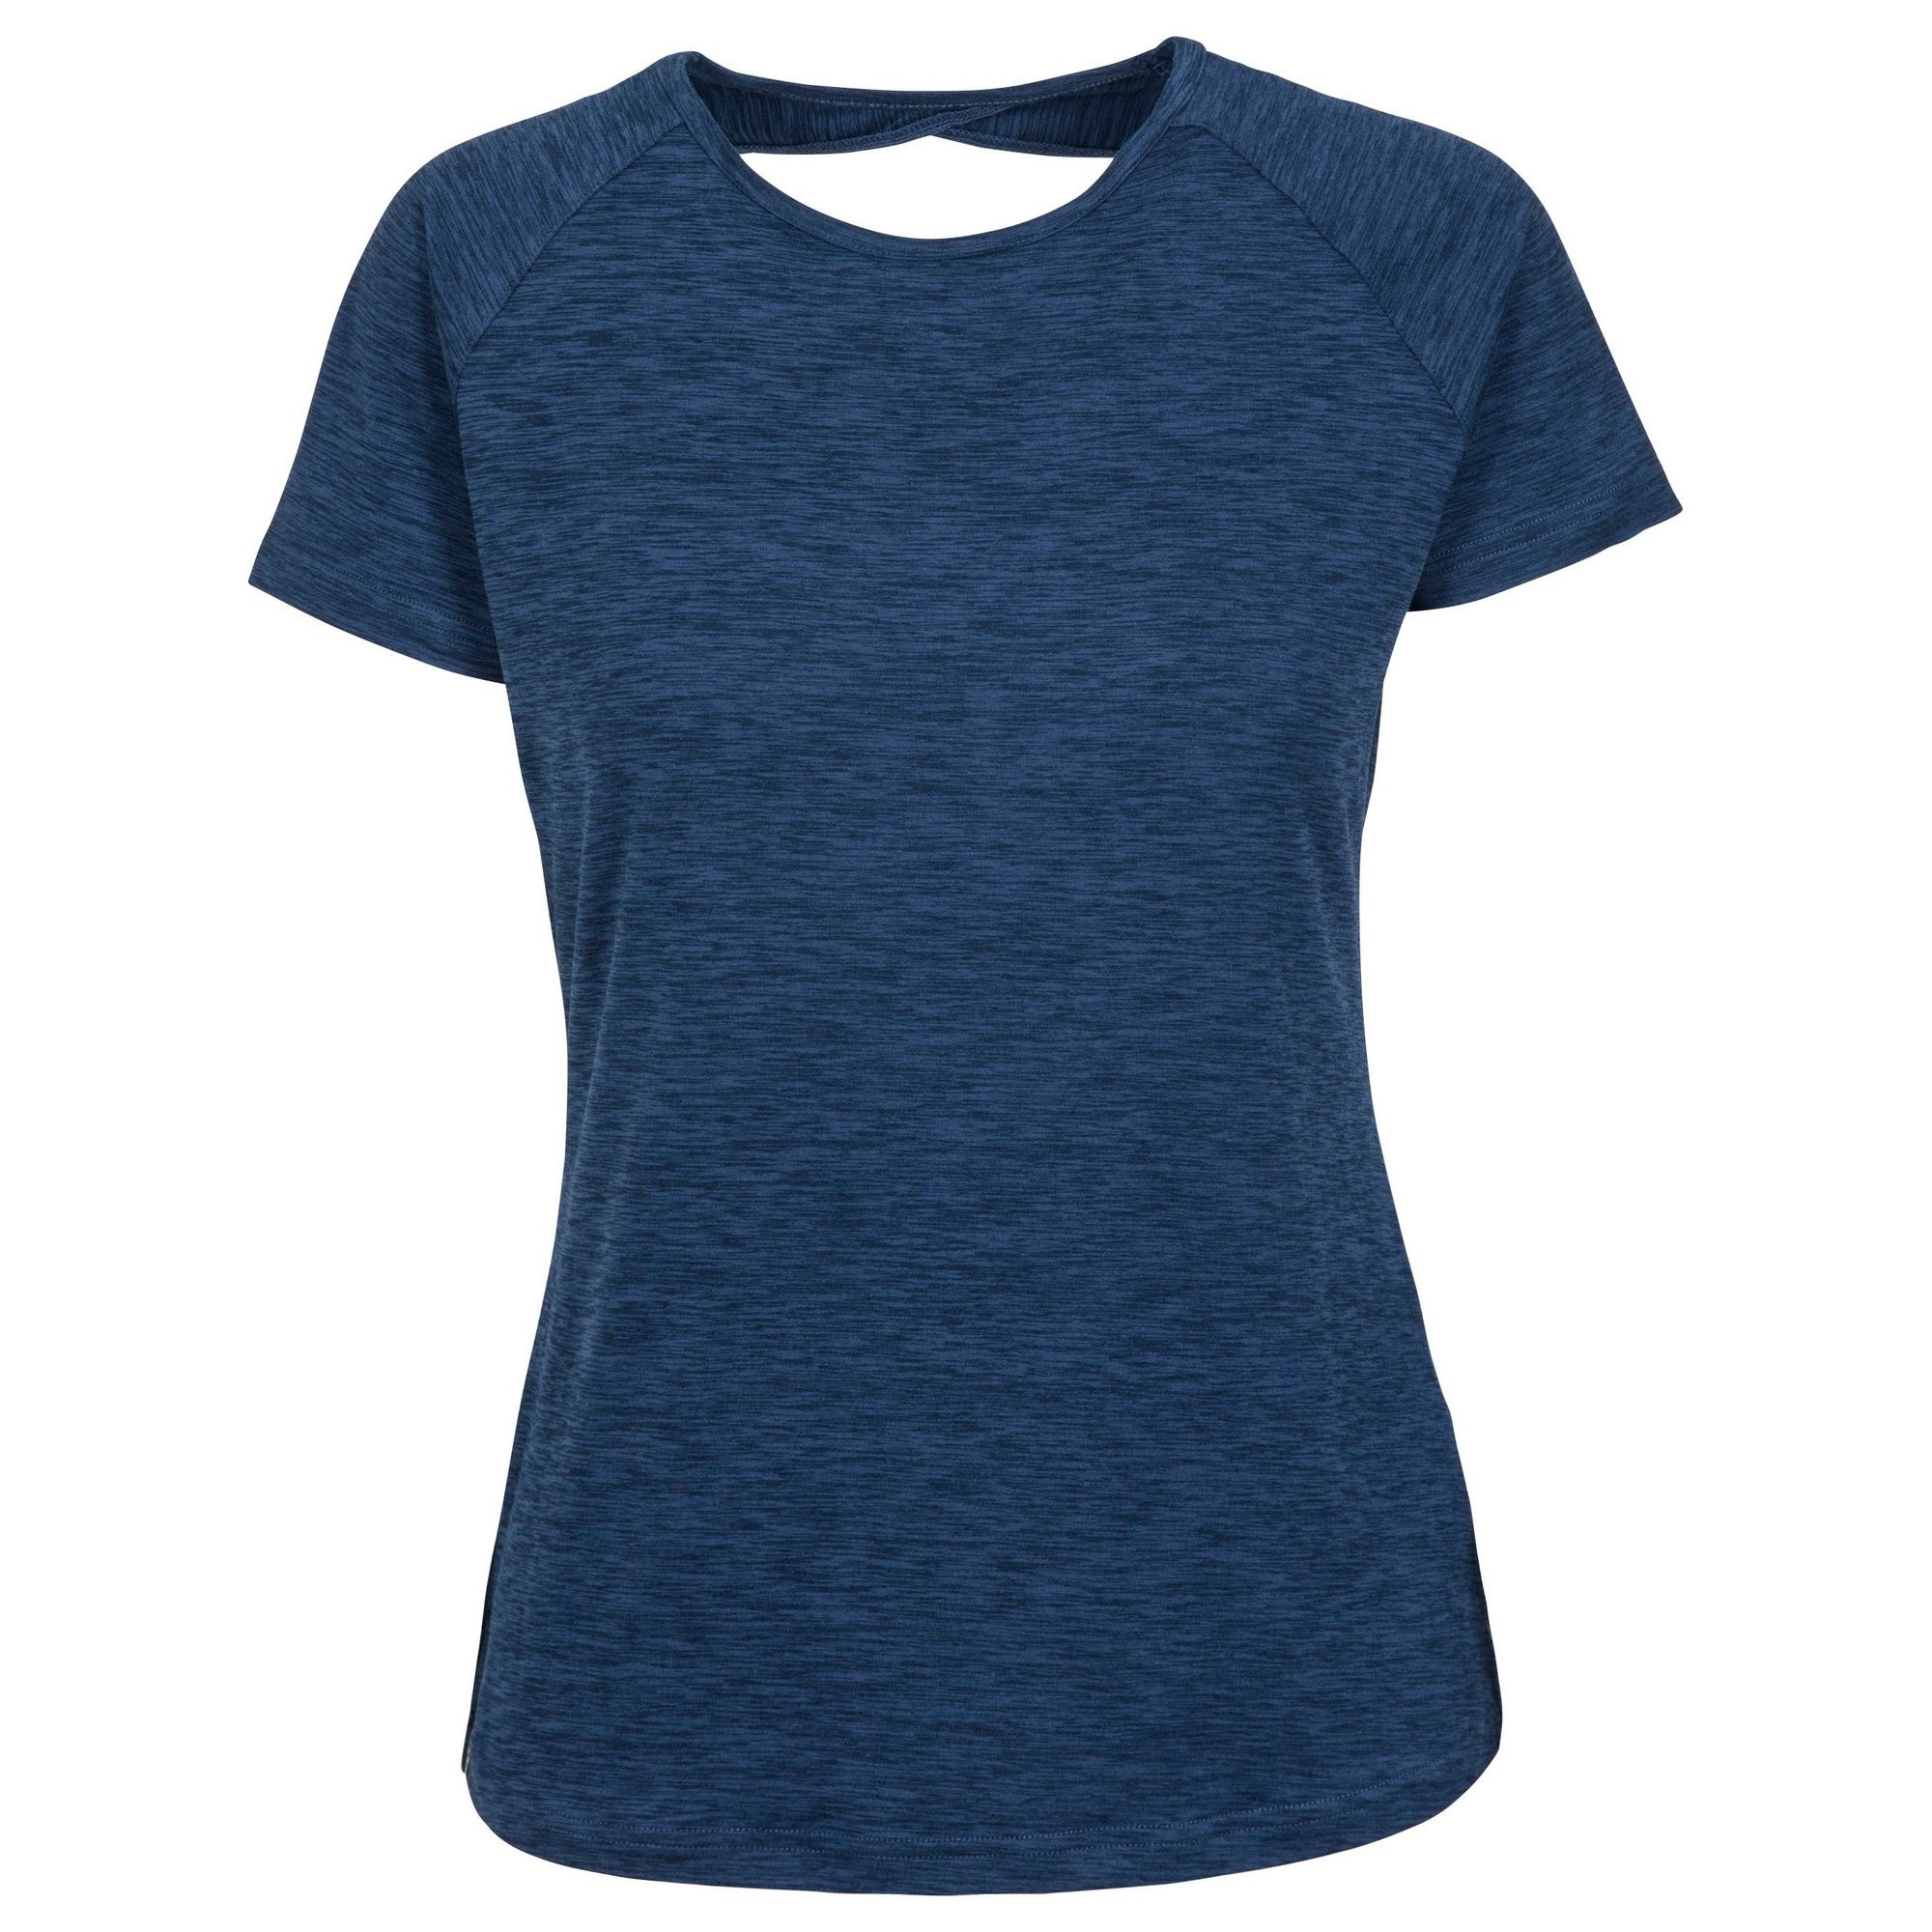 93% Polyester, 7% Elastane. Short sleeves. Round neck. Crossover detail at back. Antibacterial. Quick dry. Trespass Womens Chest Sizing (approx): XS/8 - 32in/81cm, S/10 - 34in/86cm, M/12 - 36in/91.4cm, L/14 - 38in/96.5cm, XL/16 - 40in/101.5cm, XXL/18 - 42in/106.5cm.